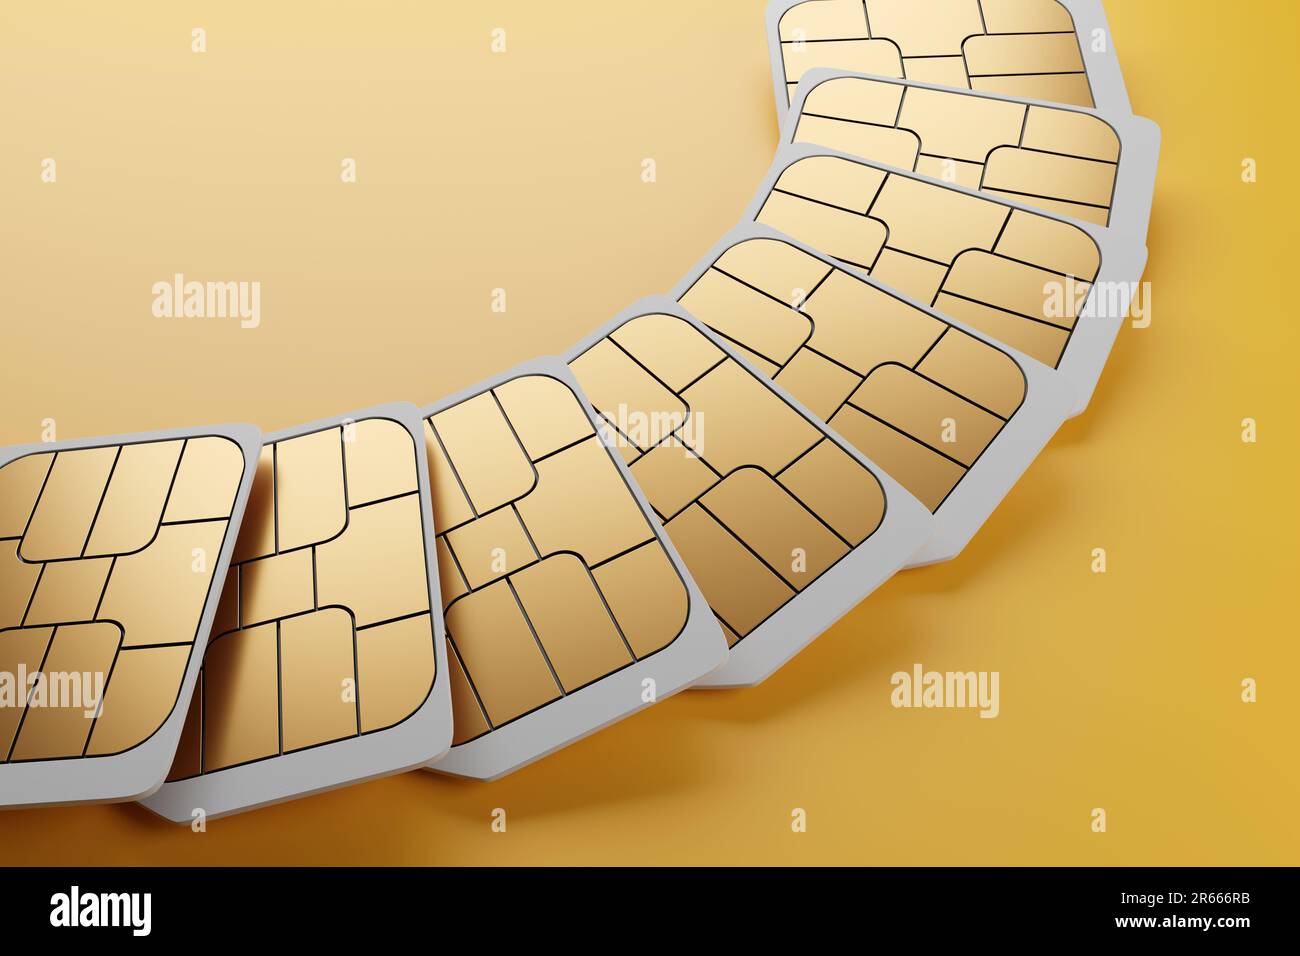 Unbranded white nano 5G smartphone SIM cards arranged in a fan shape on yellow background. Untraceable anonymous SIM cards and telecommunication Stock Photo